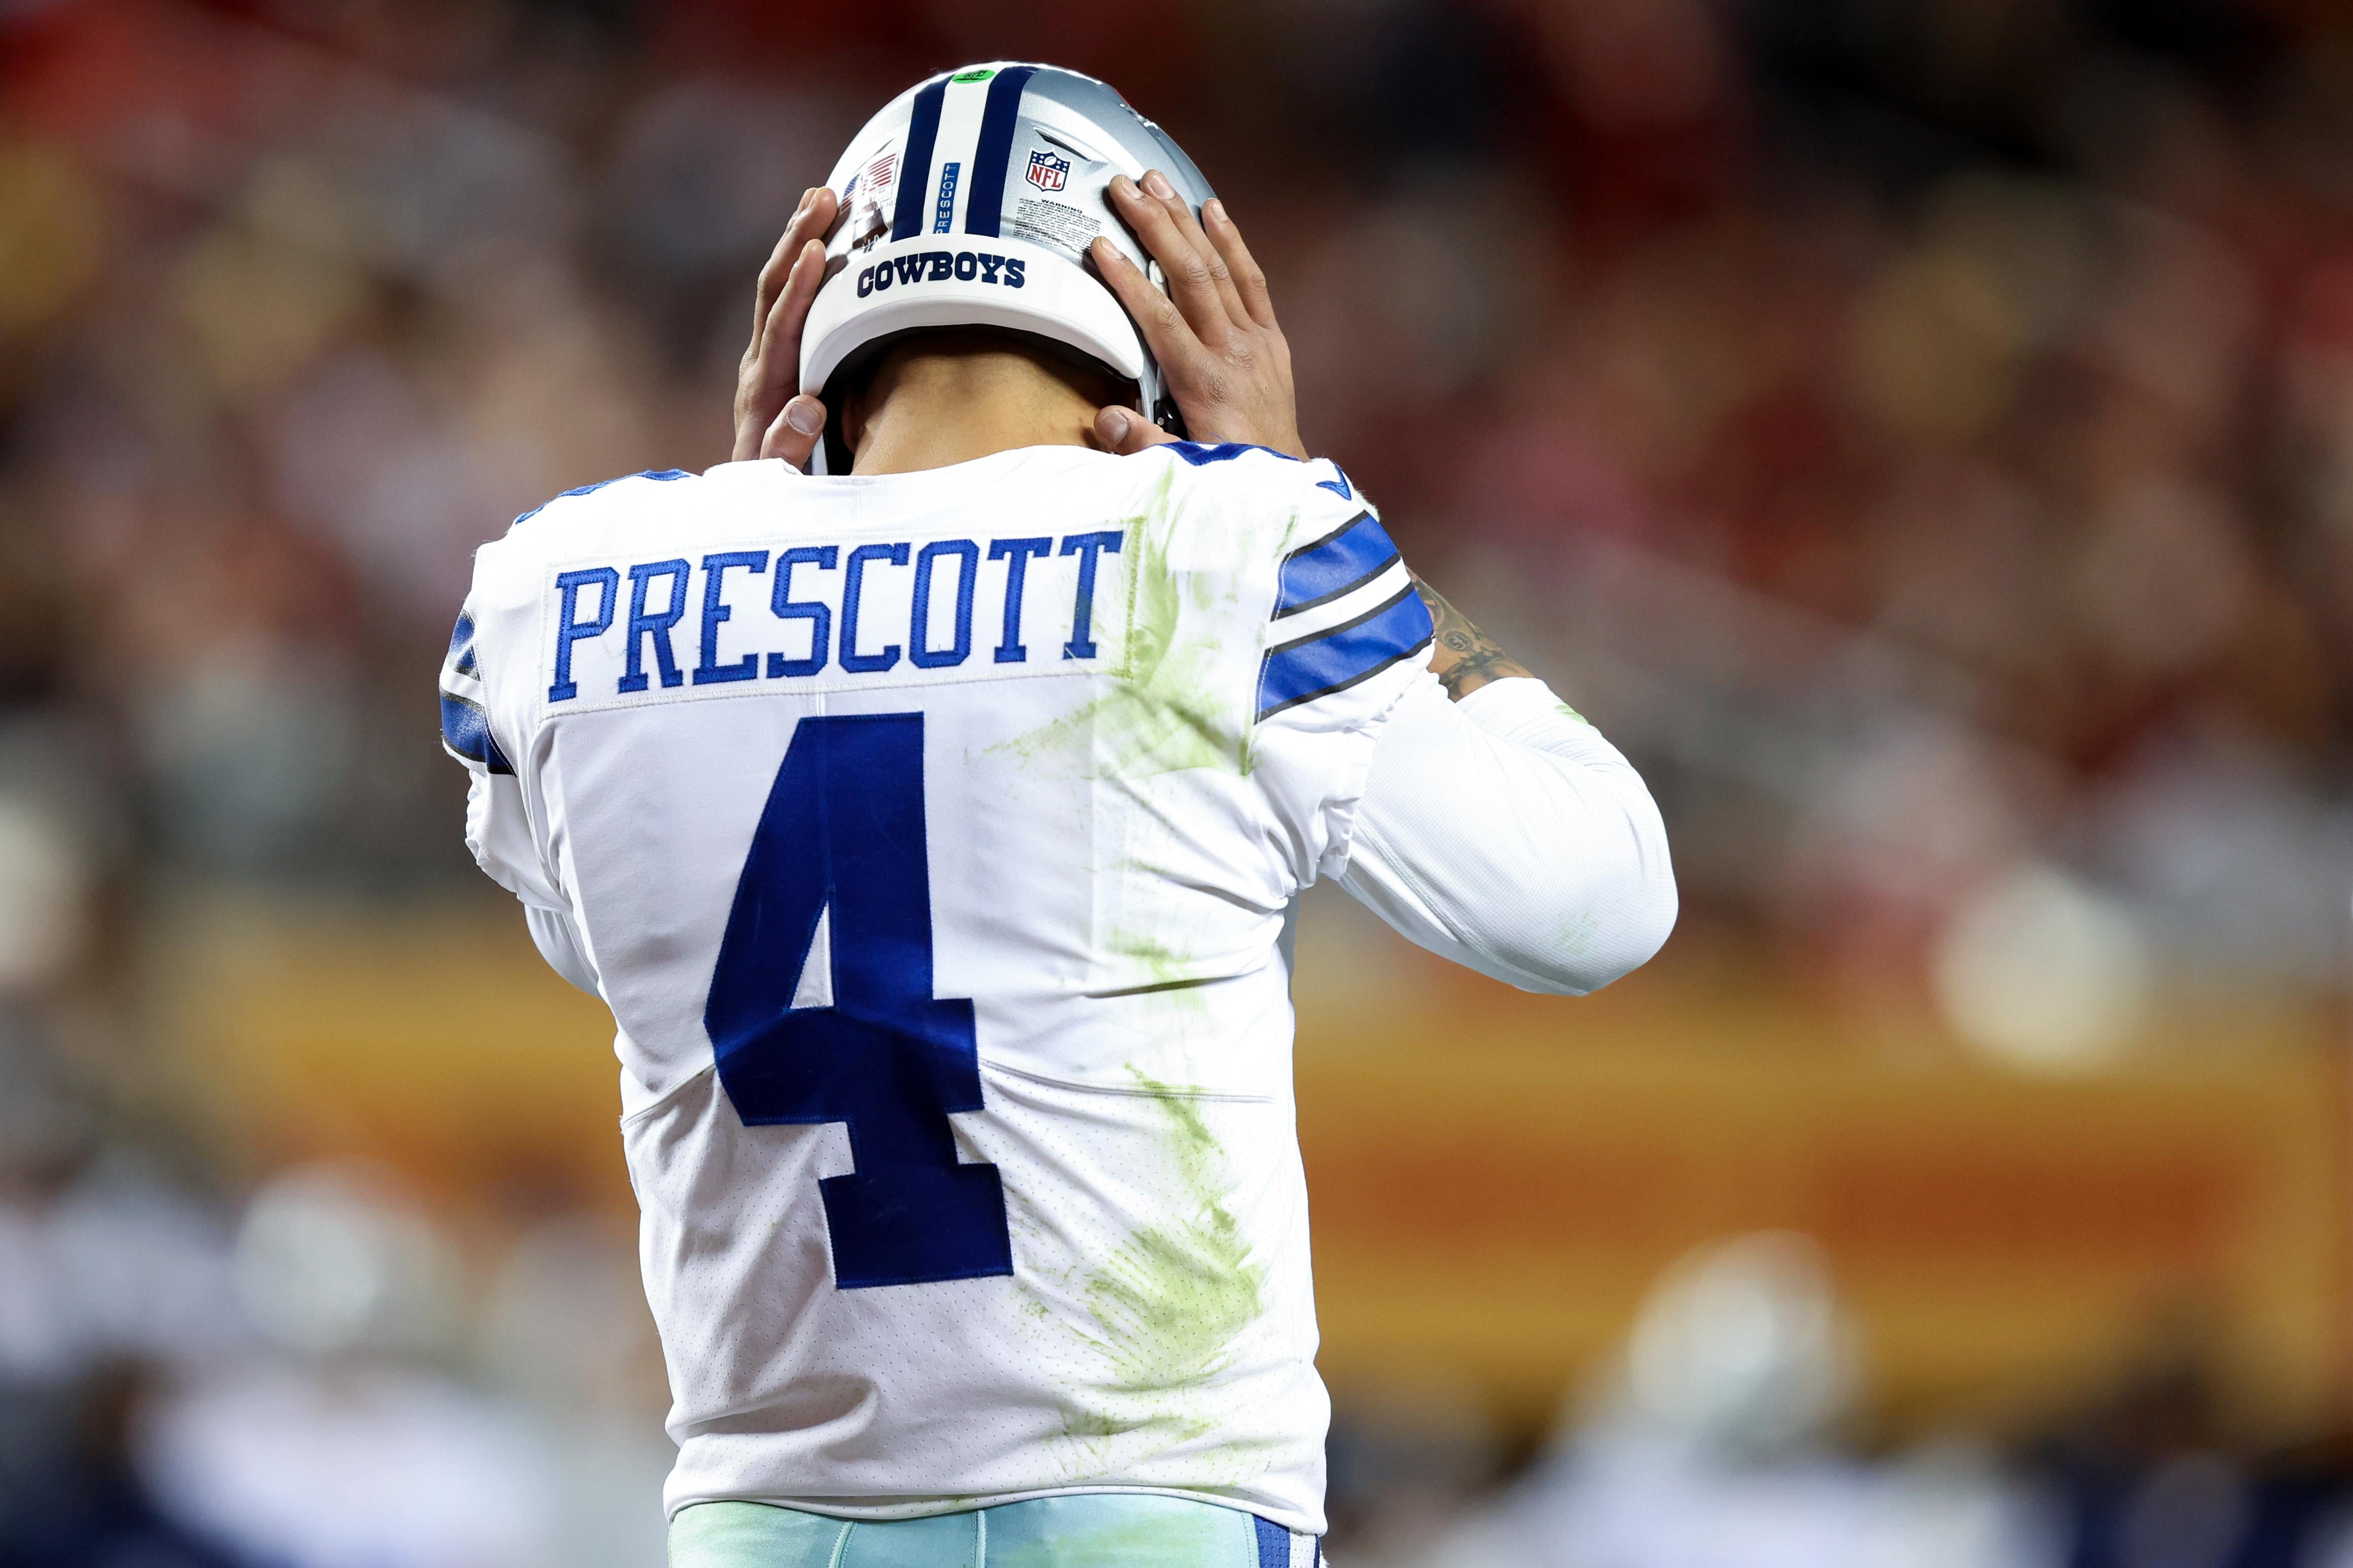 Prescott from behind puts his hands on the side of his head in frustration